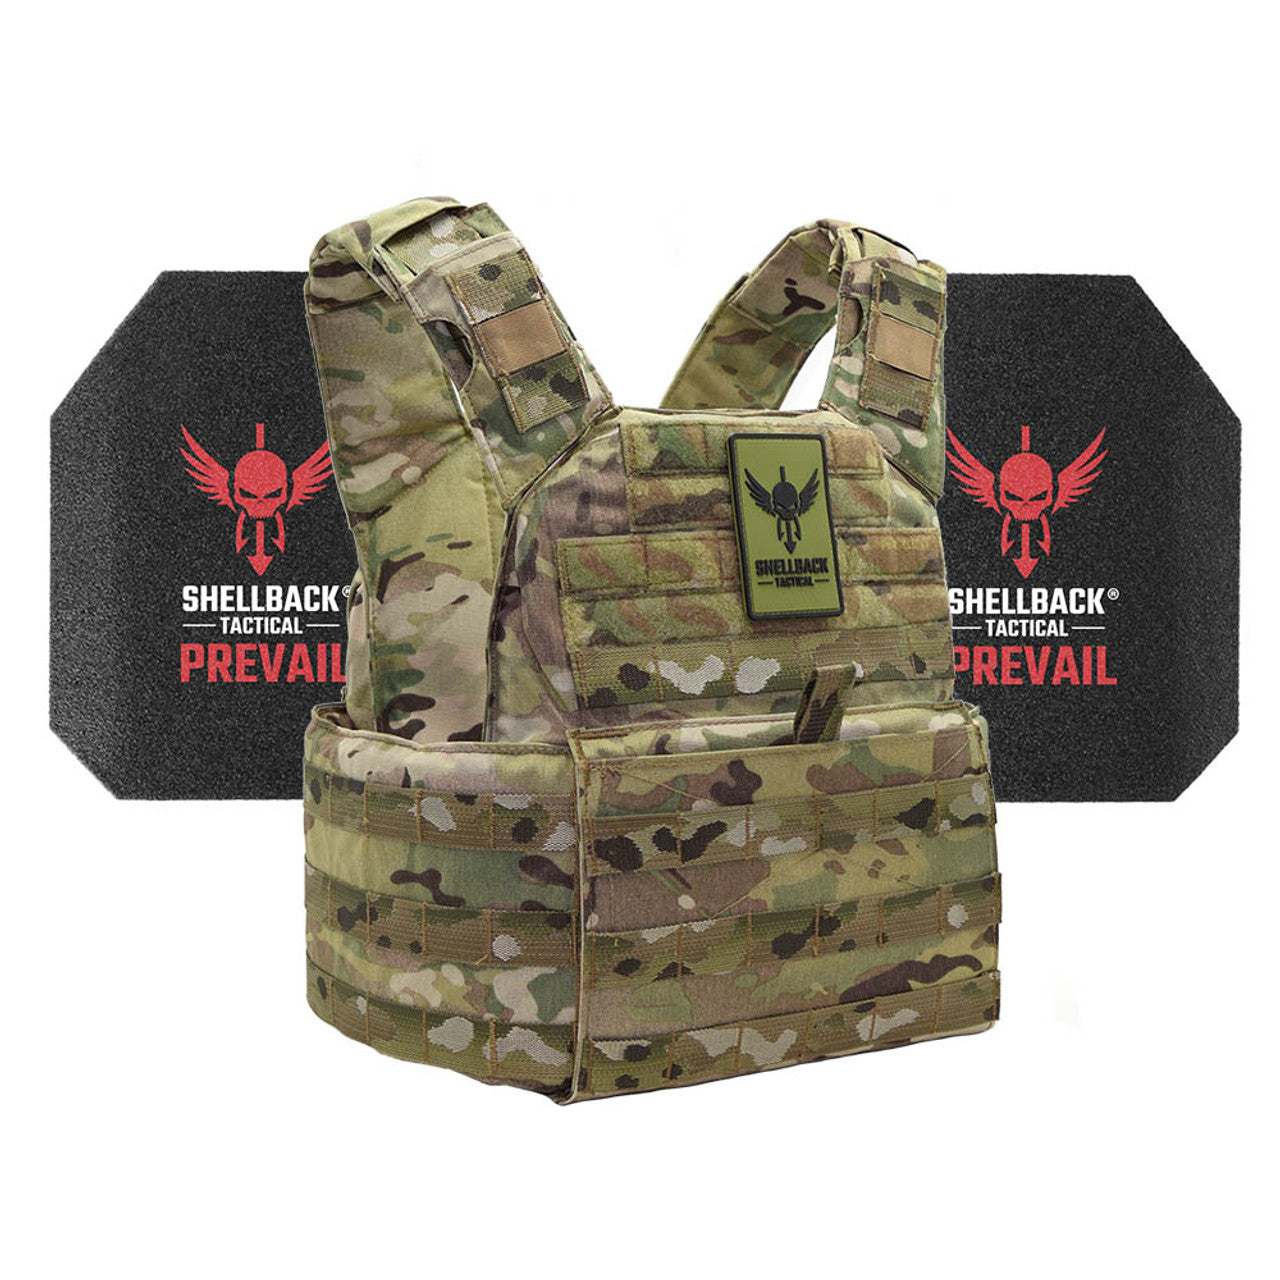 A Shellback Tactical Banshee Rifle Level III Armor Kit with AR1000 Steel Plates plate carrier with a Pivotal Body Armor grenade and a Pivotal Body Armor grenade.